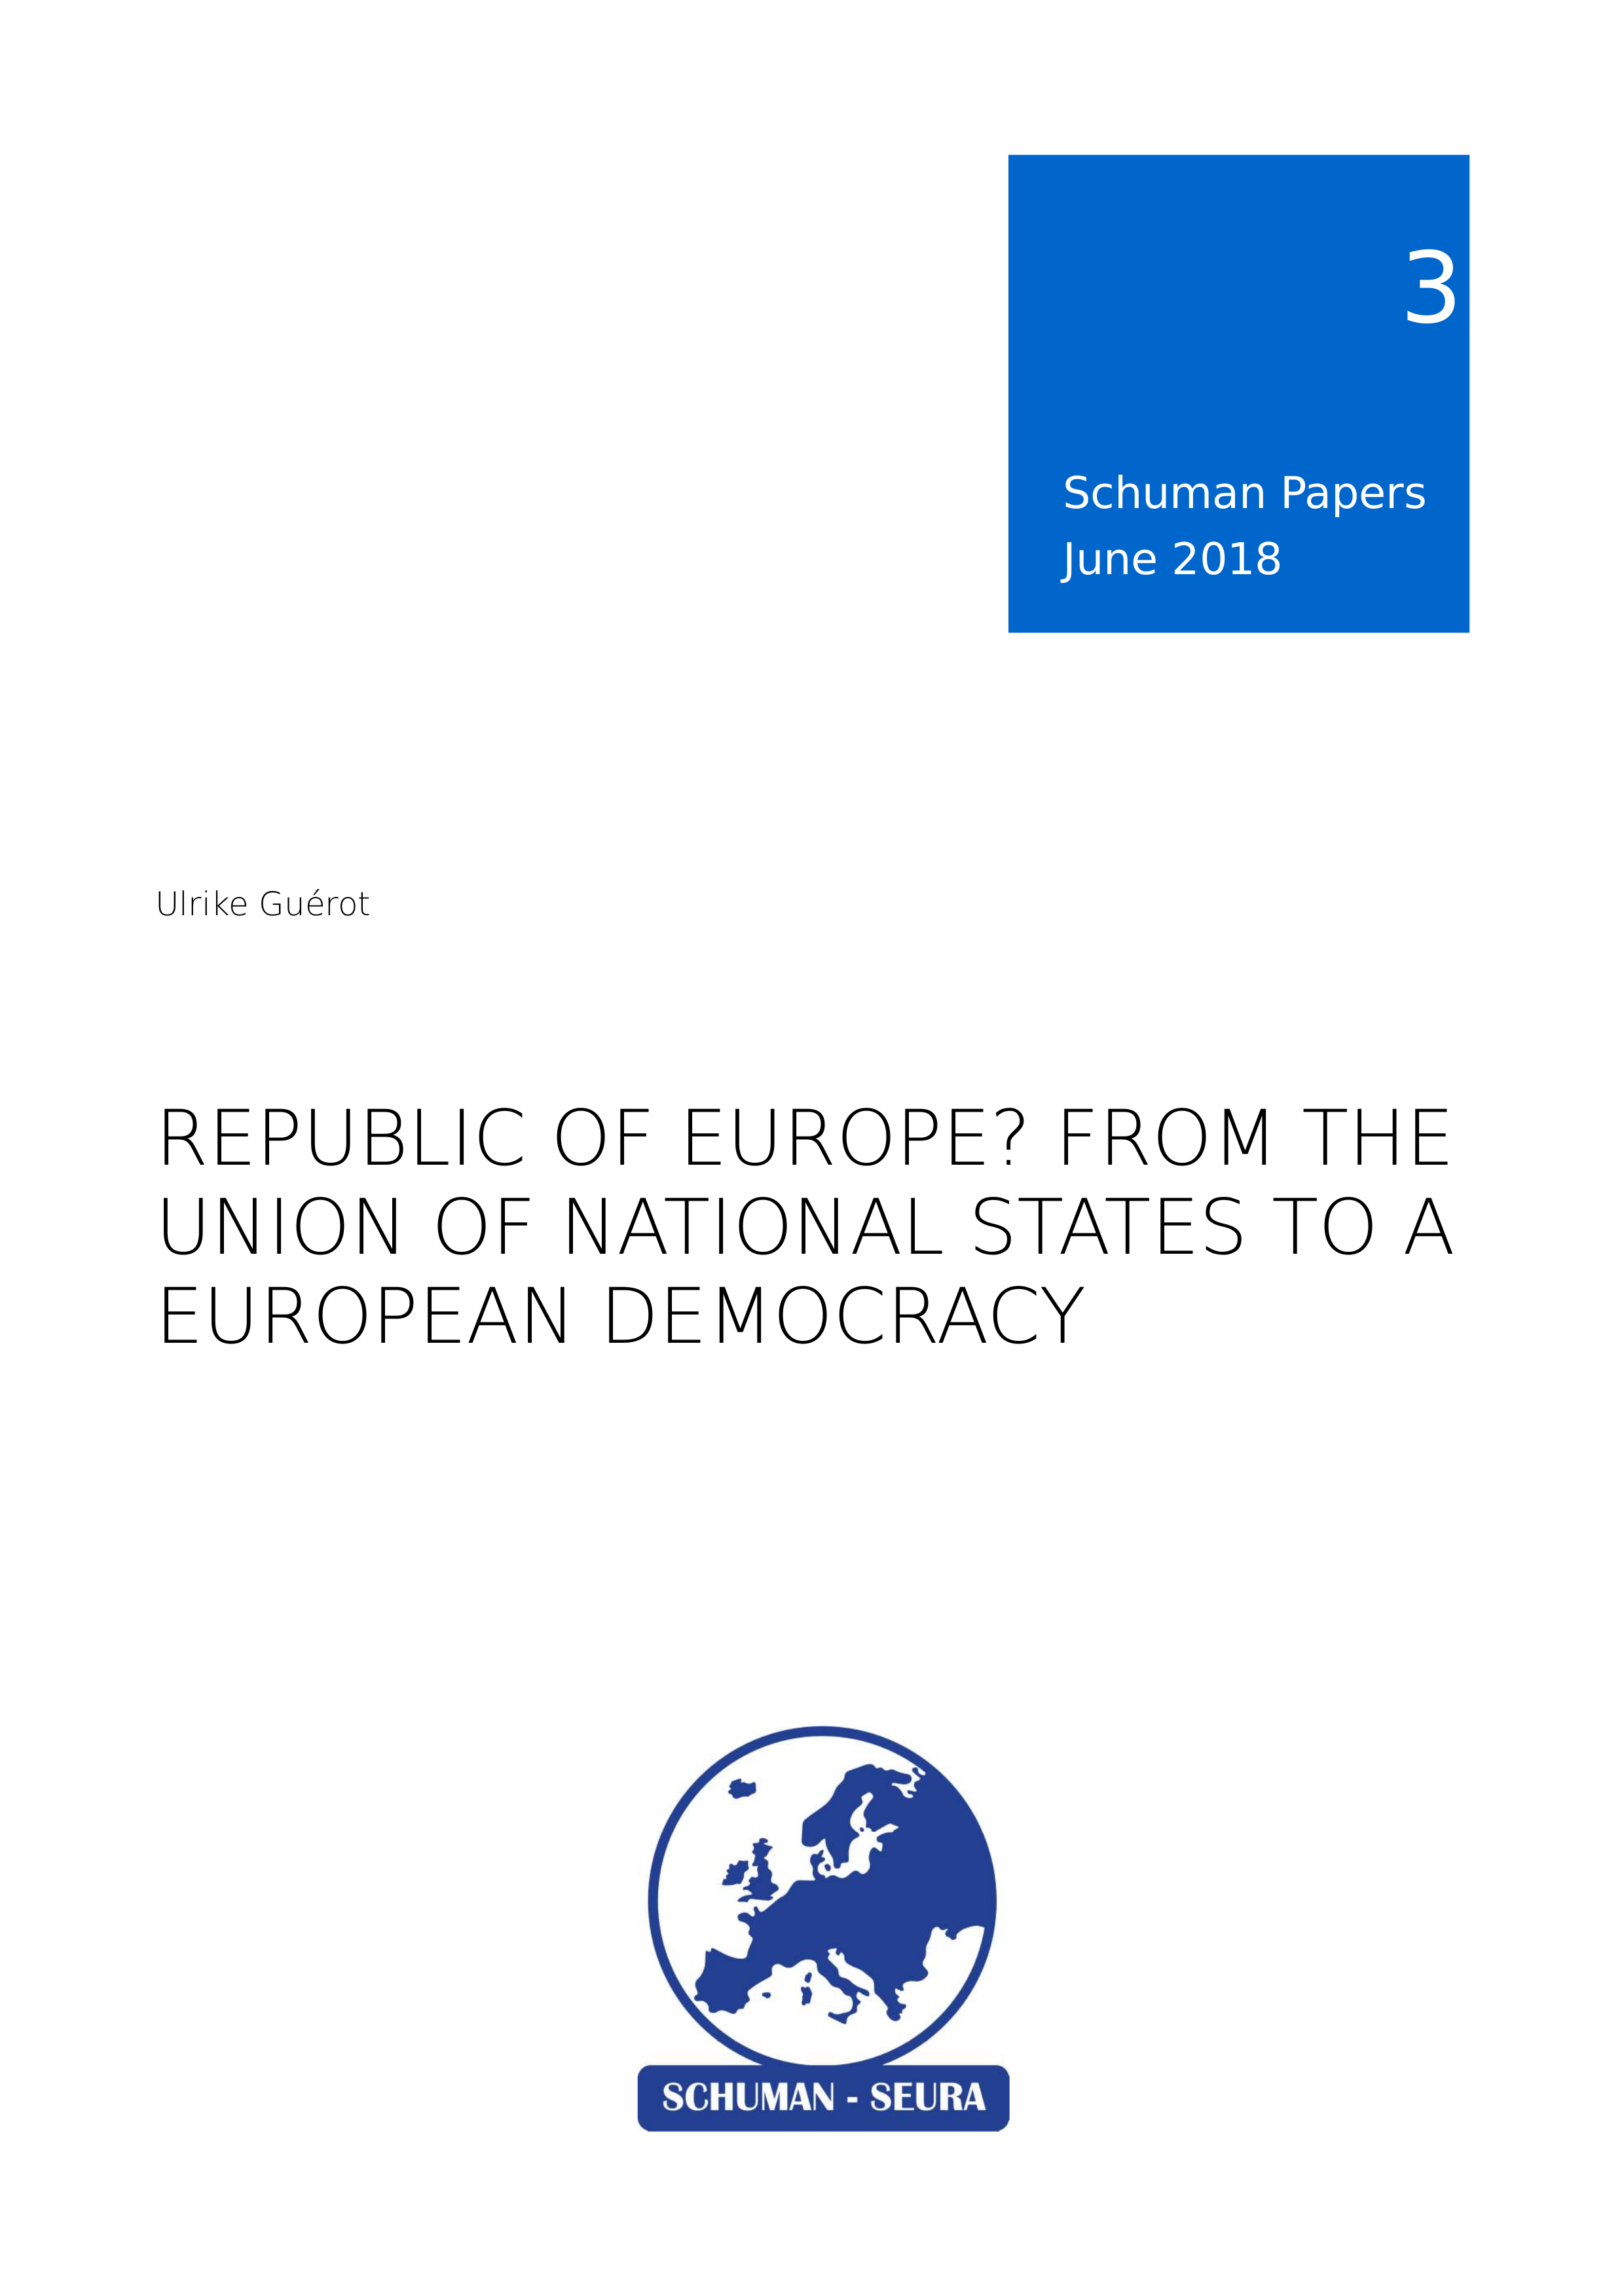 Schuman Papers Nr 3 1 18 About European Democracy